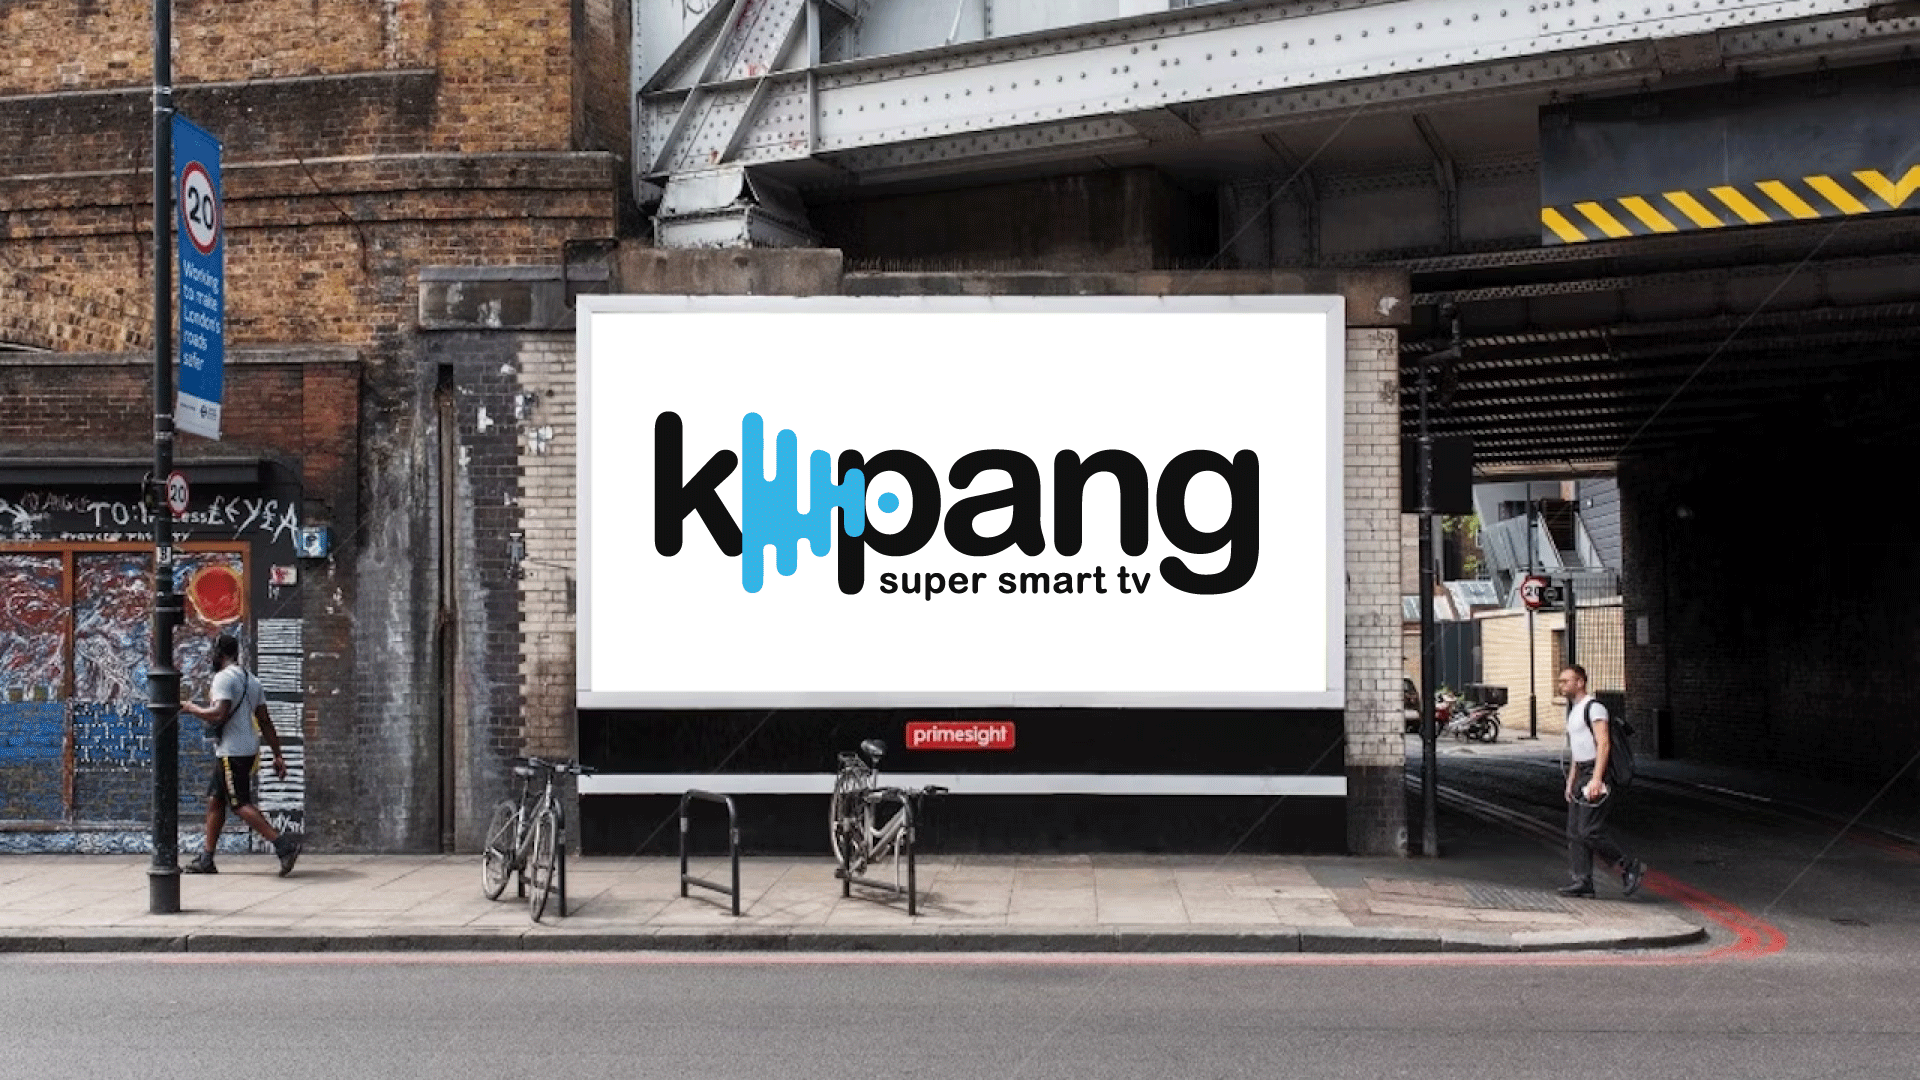 Kapang announced more than 100 new channels viewable for free